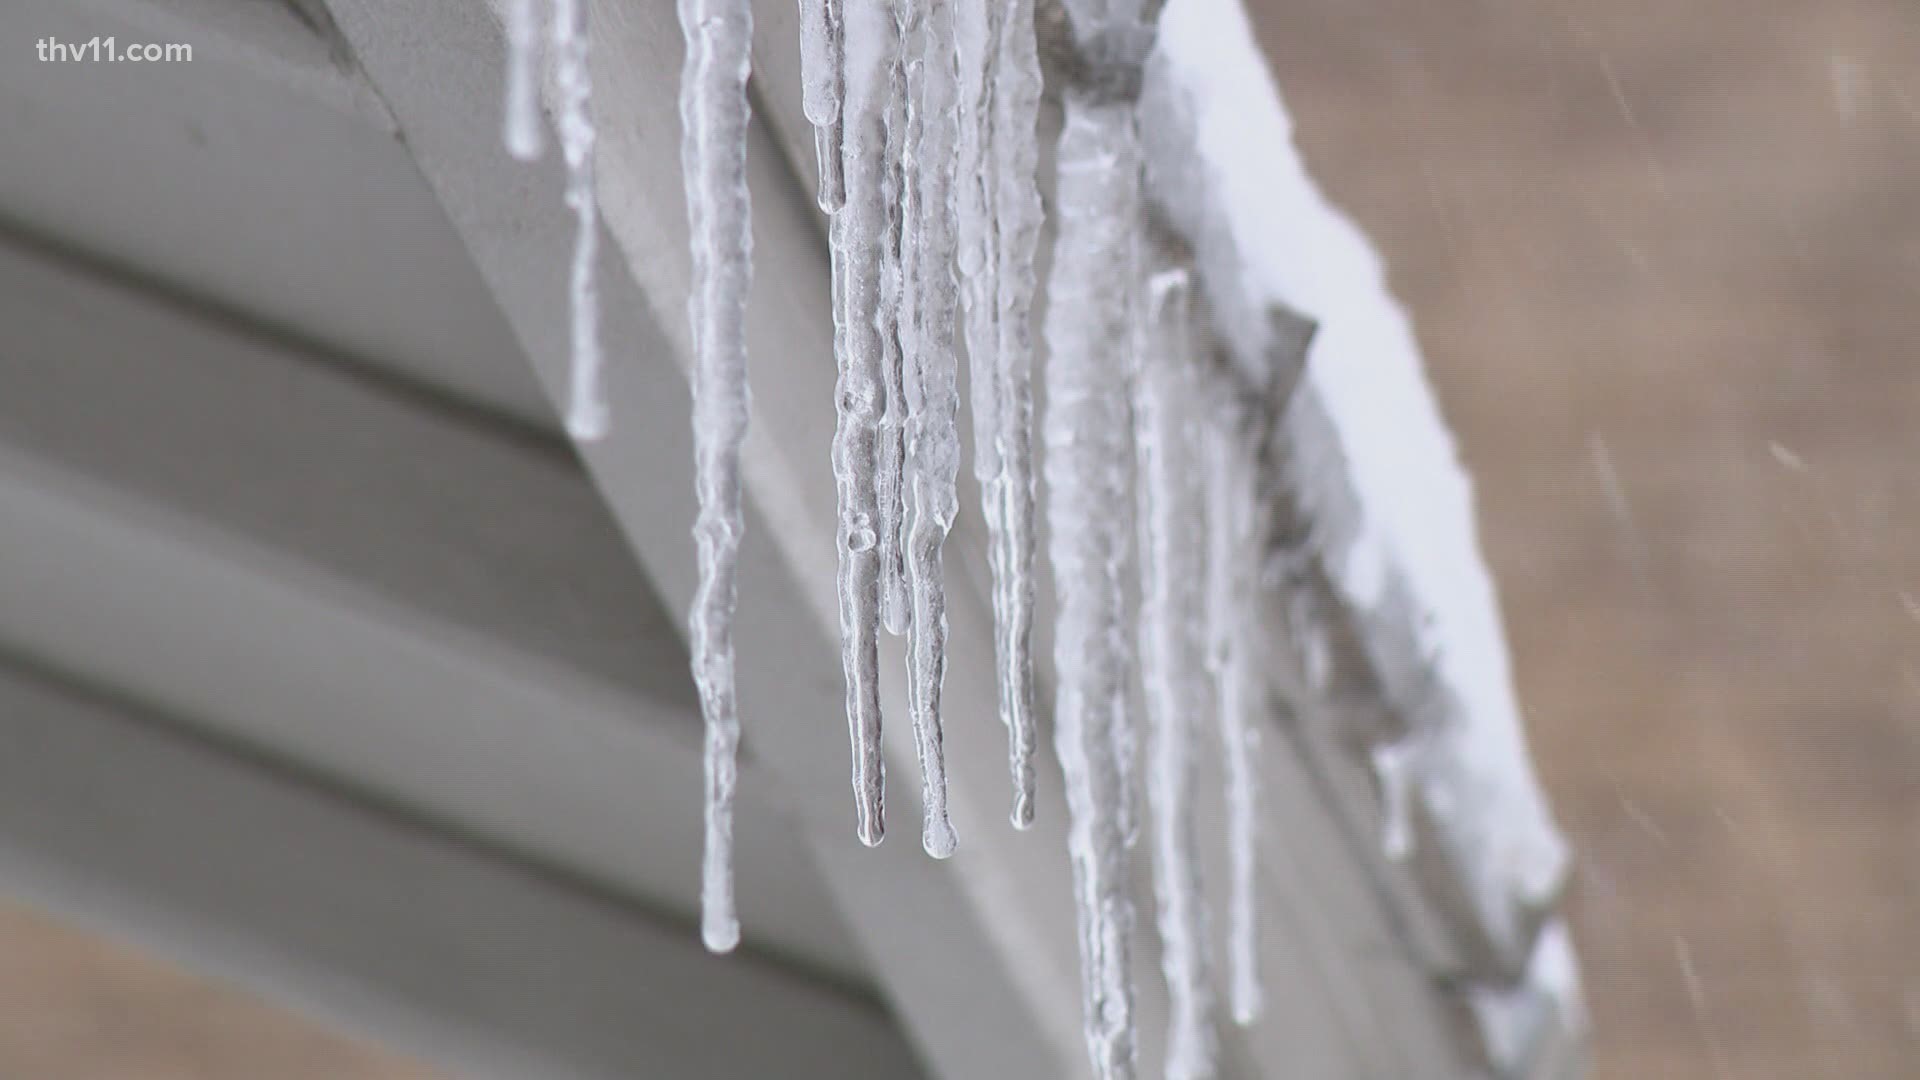 Be extra careful as you come and go from buildings. Icicles will be falling as the ice melts.